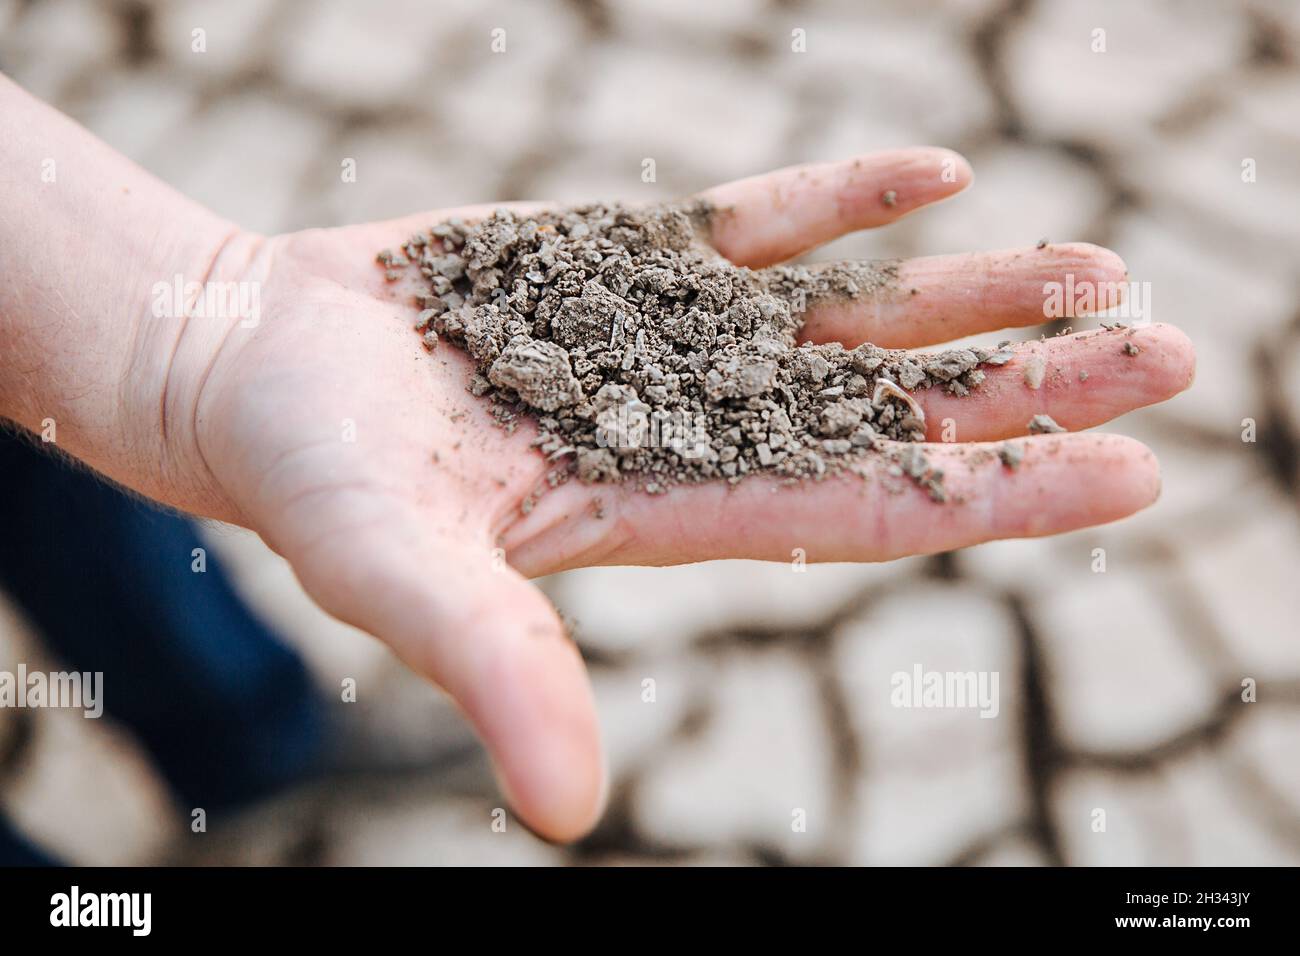 The man is holding the very dry soil in his palm. Concept of soil erosion due to lack of precipitation due to global warming. Stock Photo